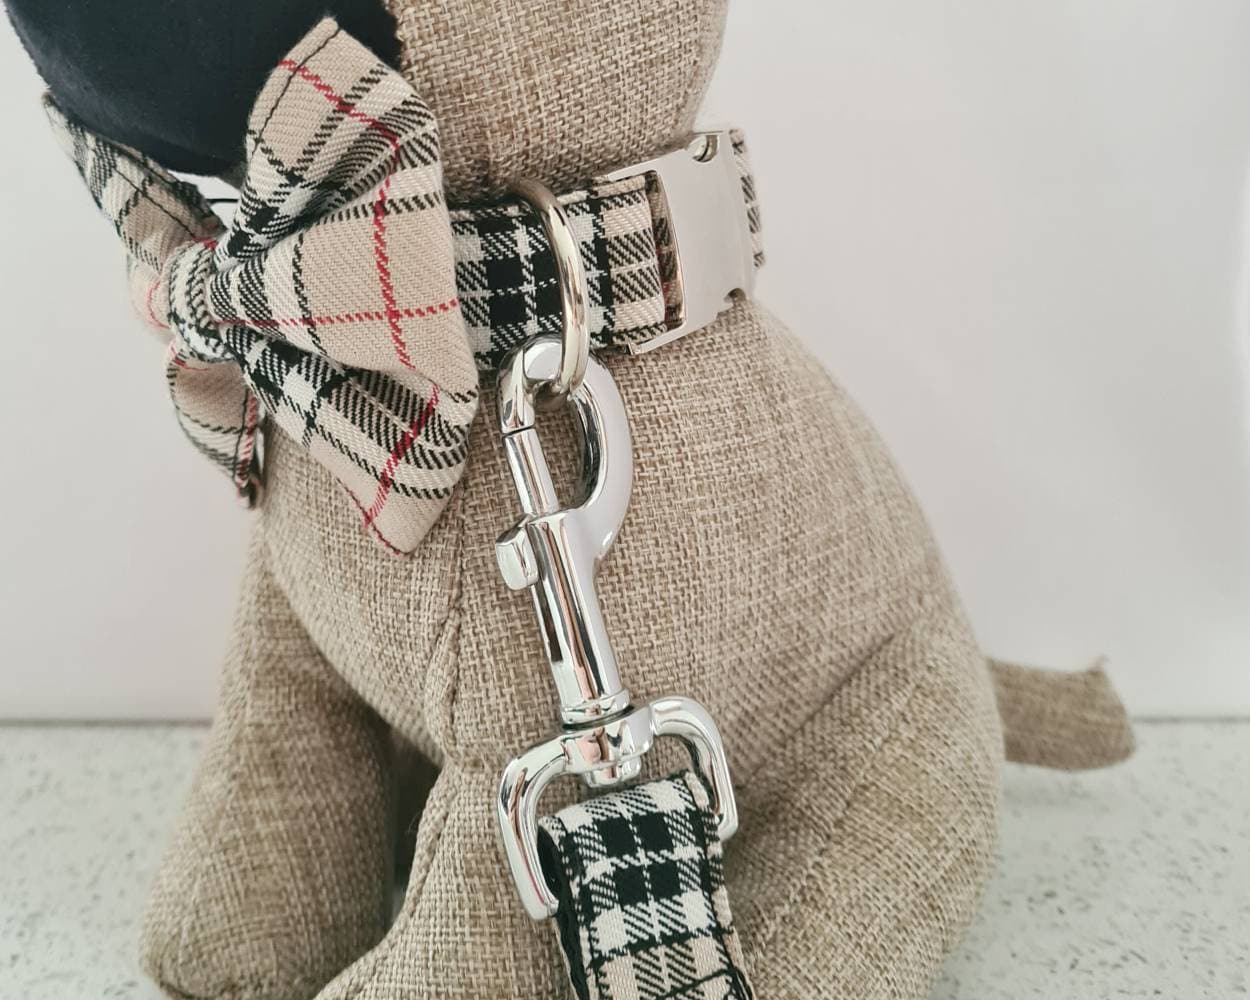 Louis Vuitton with Metal LV Plate Dog Harness and Leash - Royal Dog Collars  - Handmade, Premium, Designer Inspired